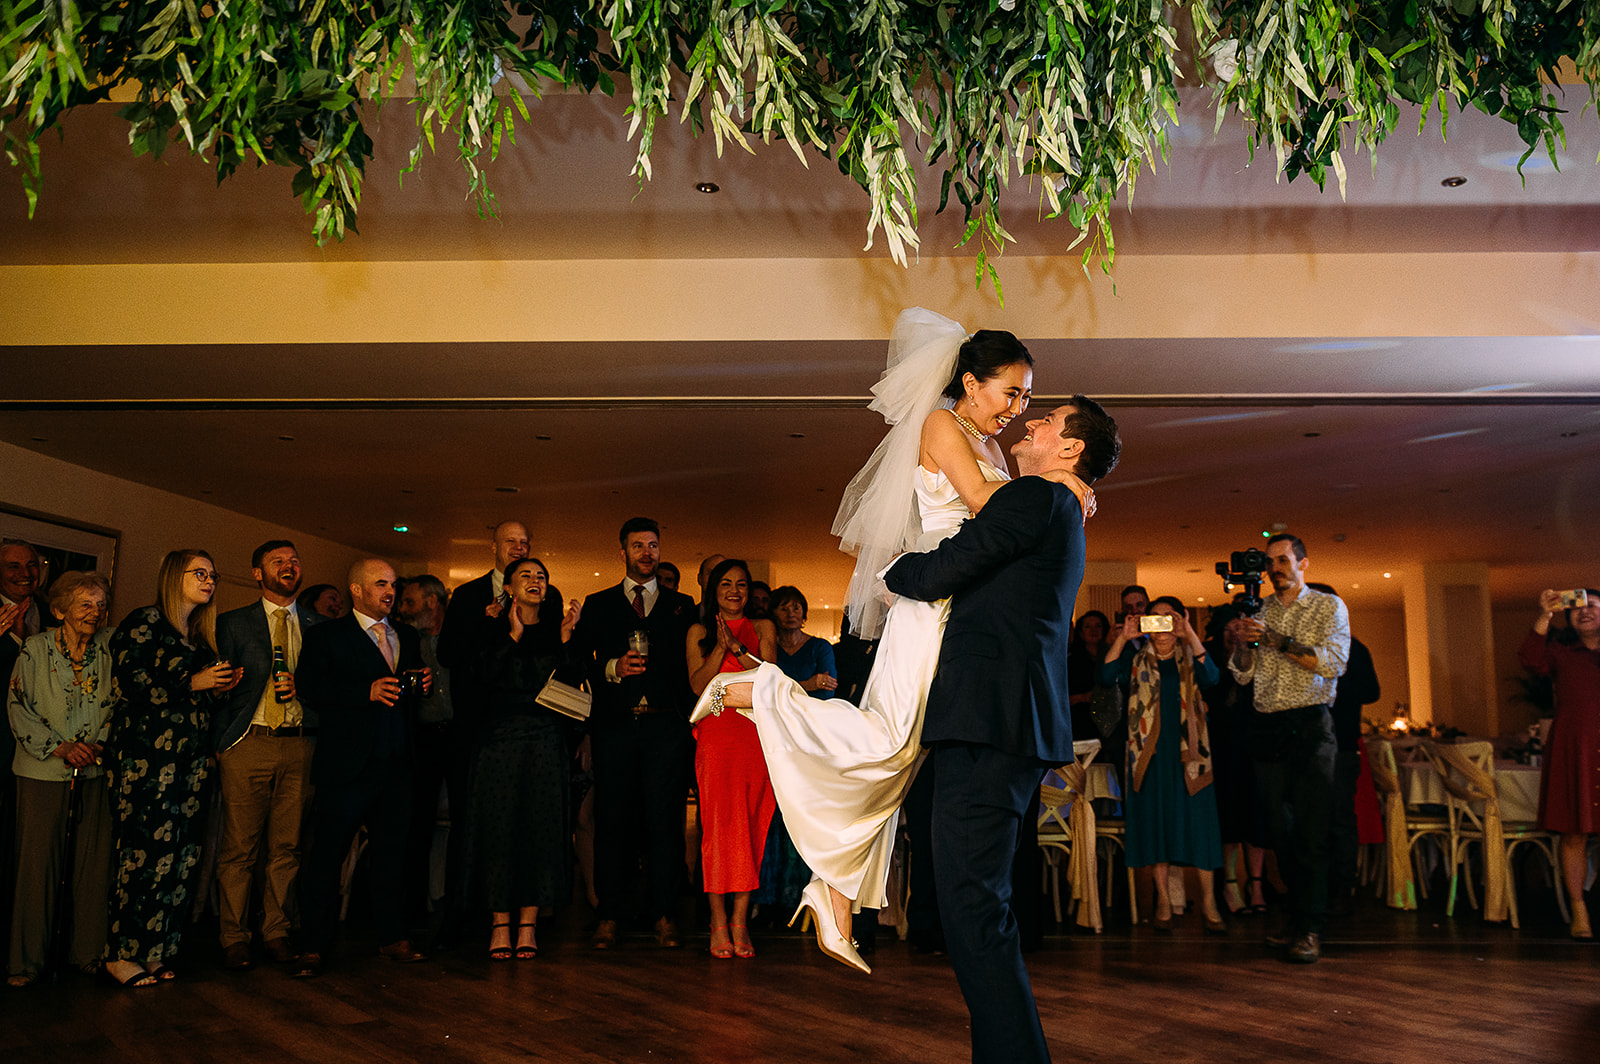 Groom lifts his bride during their first dance.